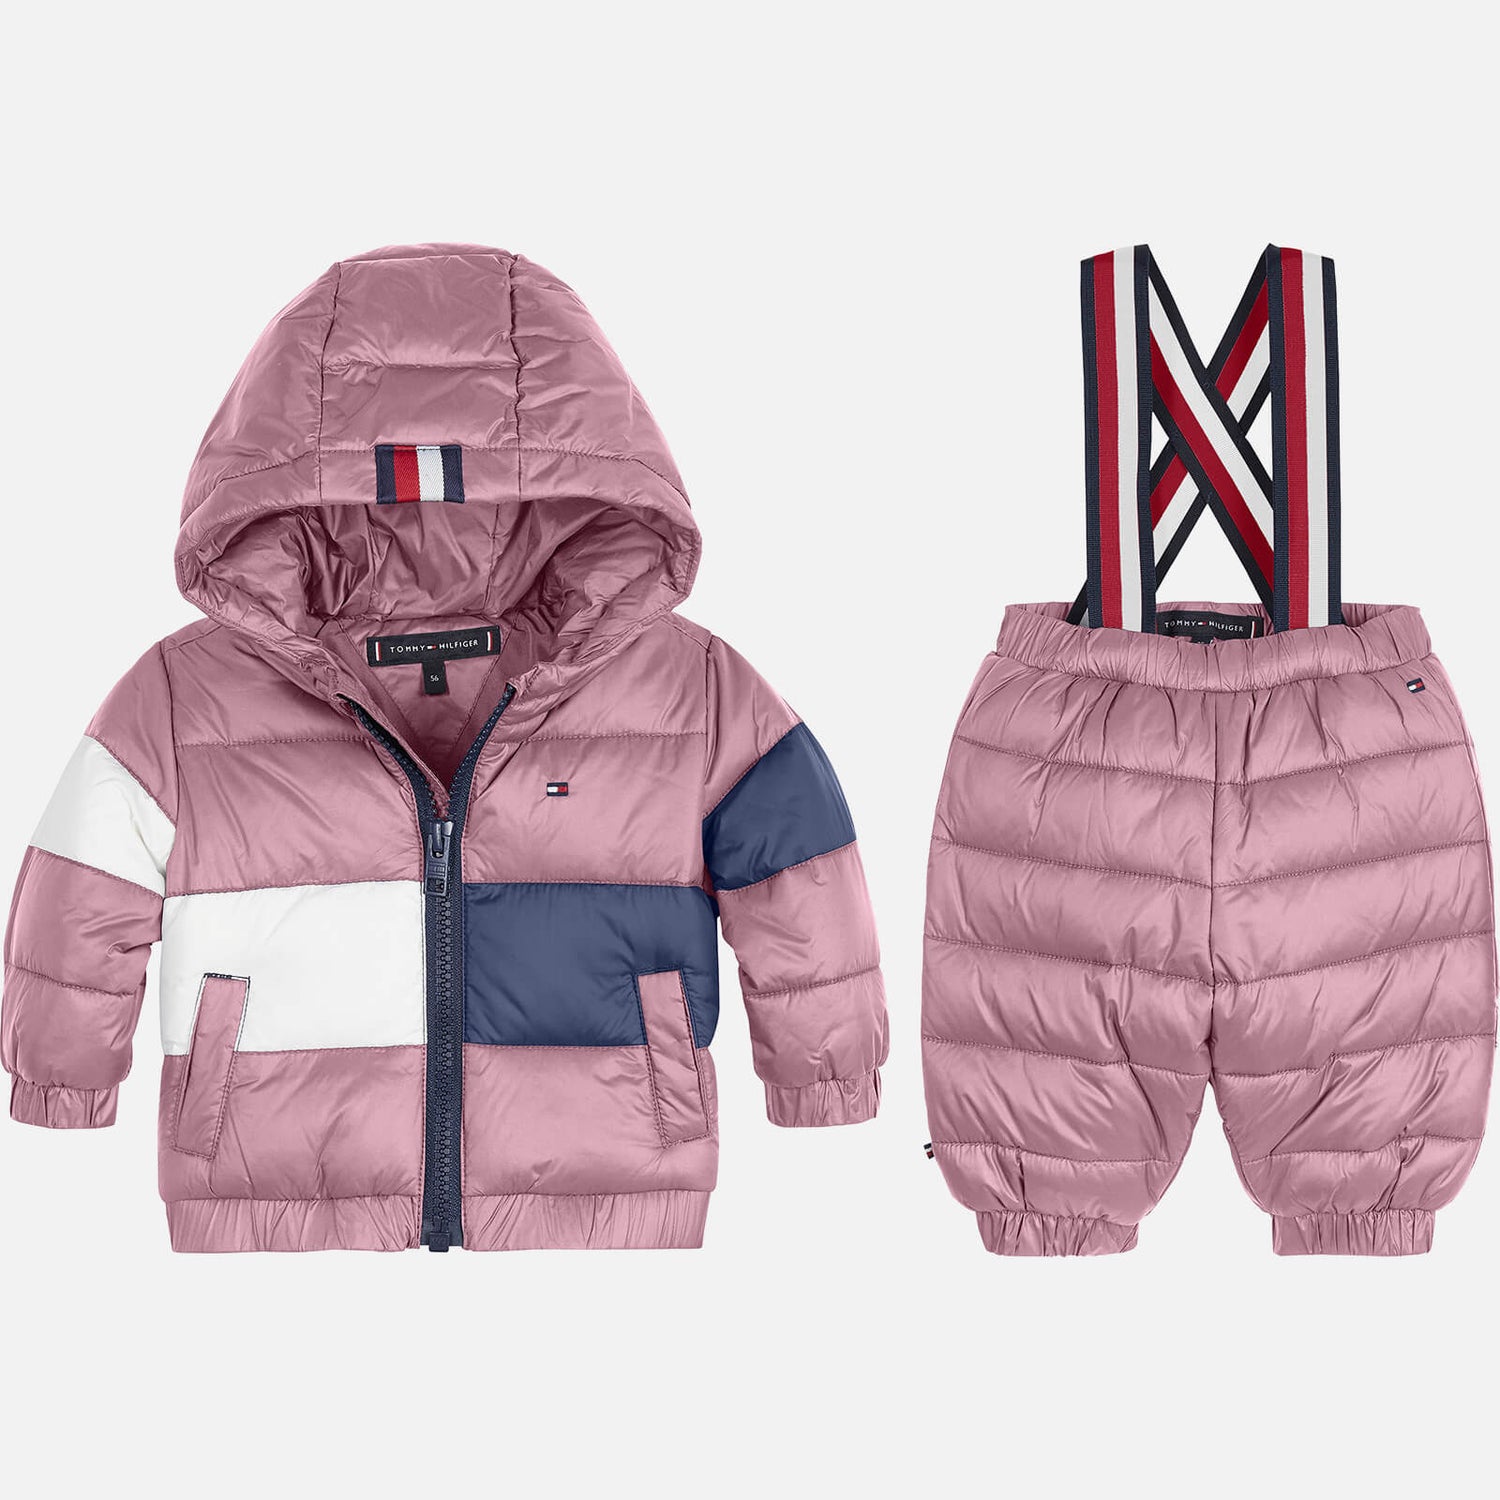 Tommy Hilfiger Baby 2 Piece Skisuit - Delicate Pink